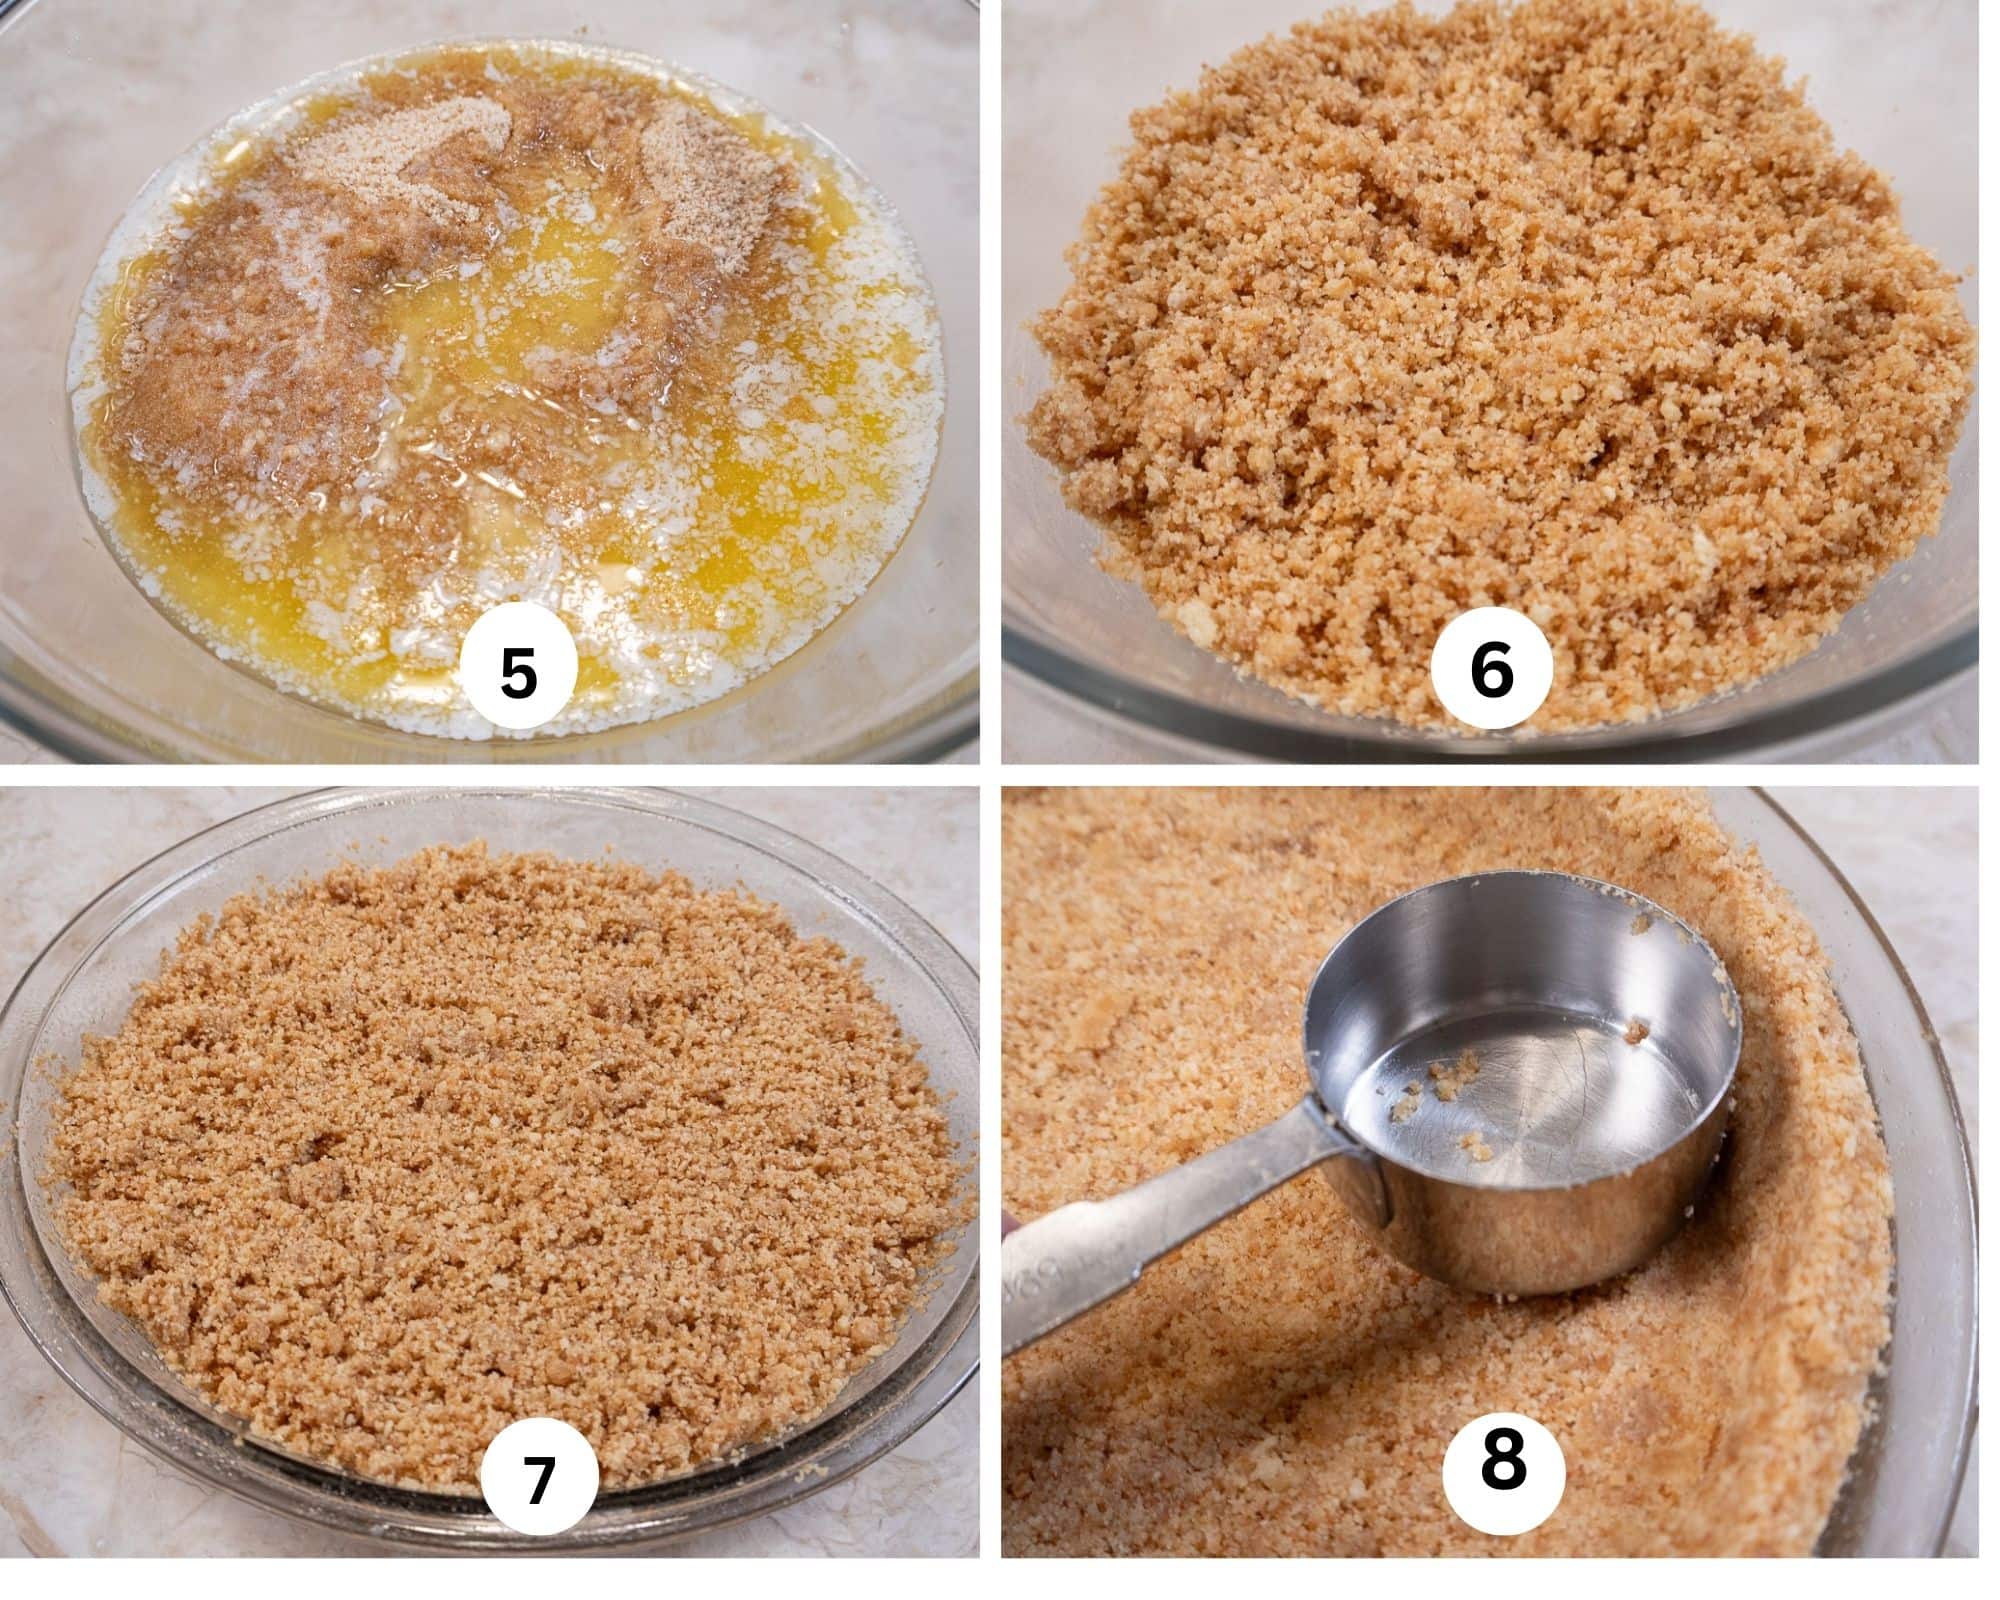 The second collage shows the butter added to the crumbs, mixed, in the pie plate and pressed in.